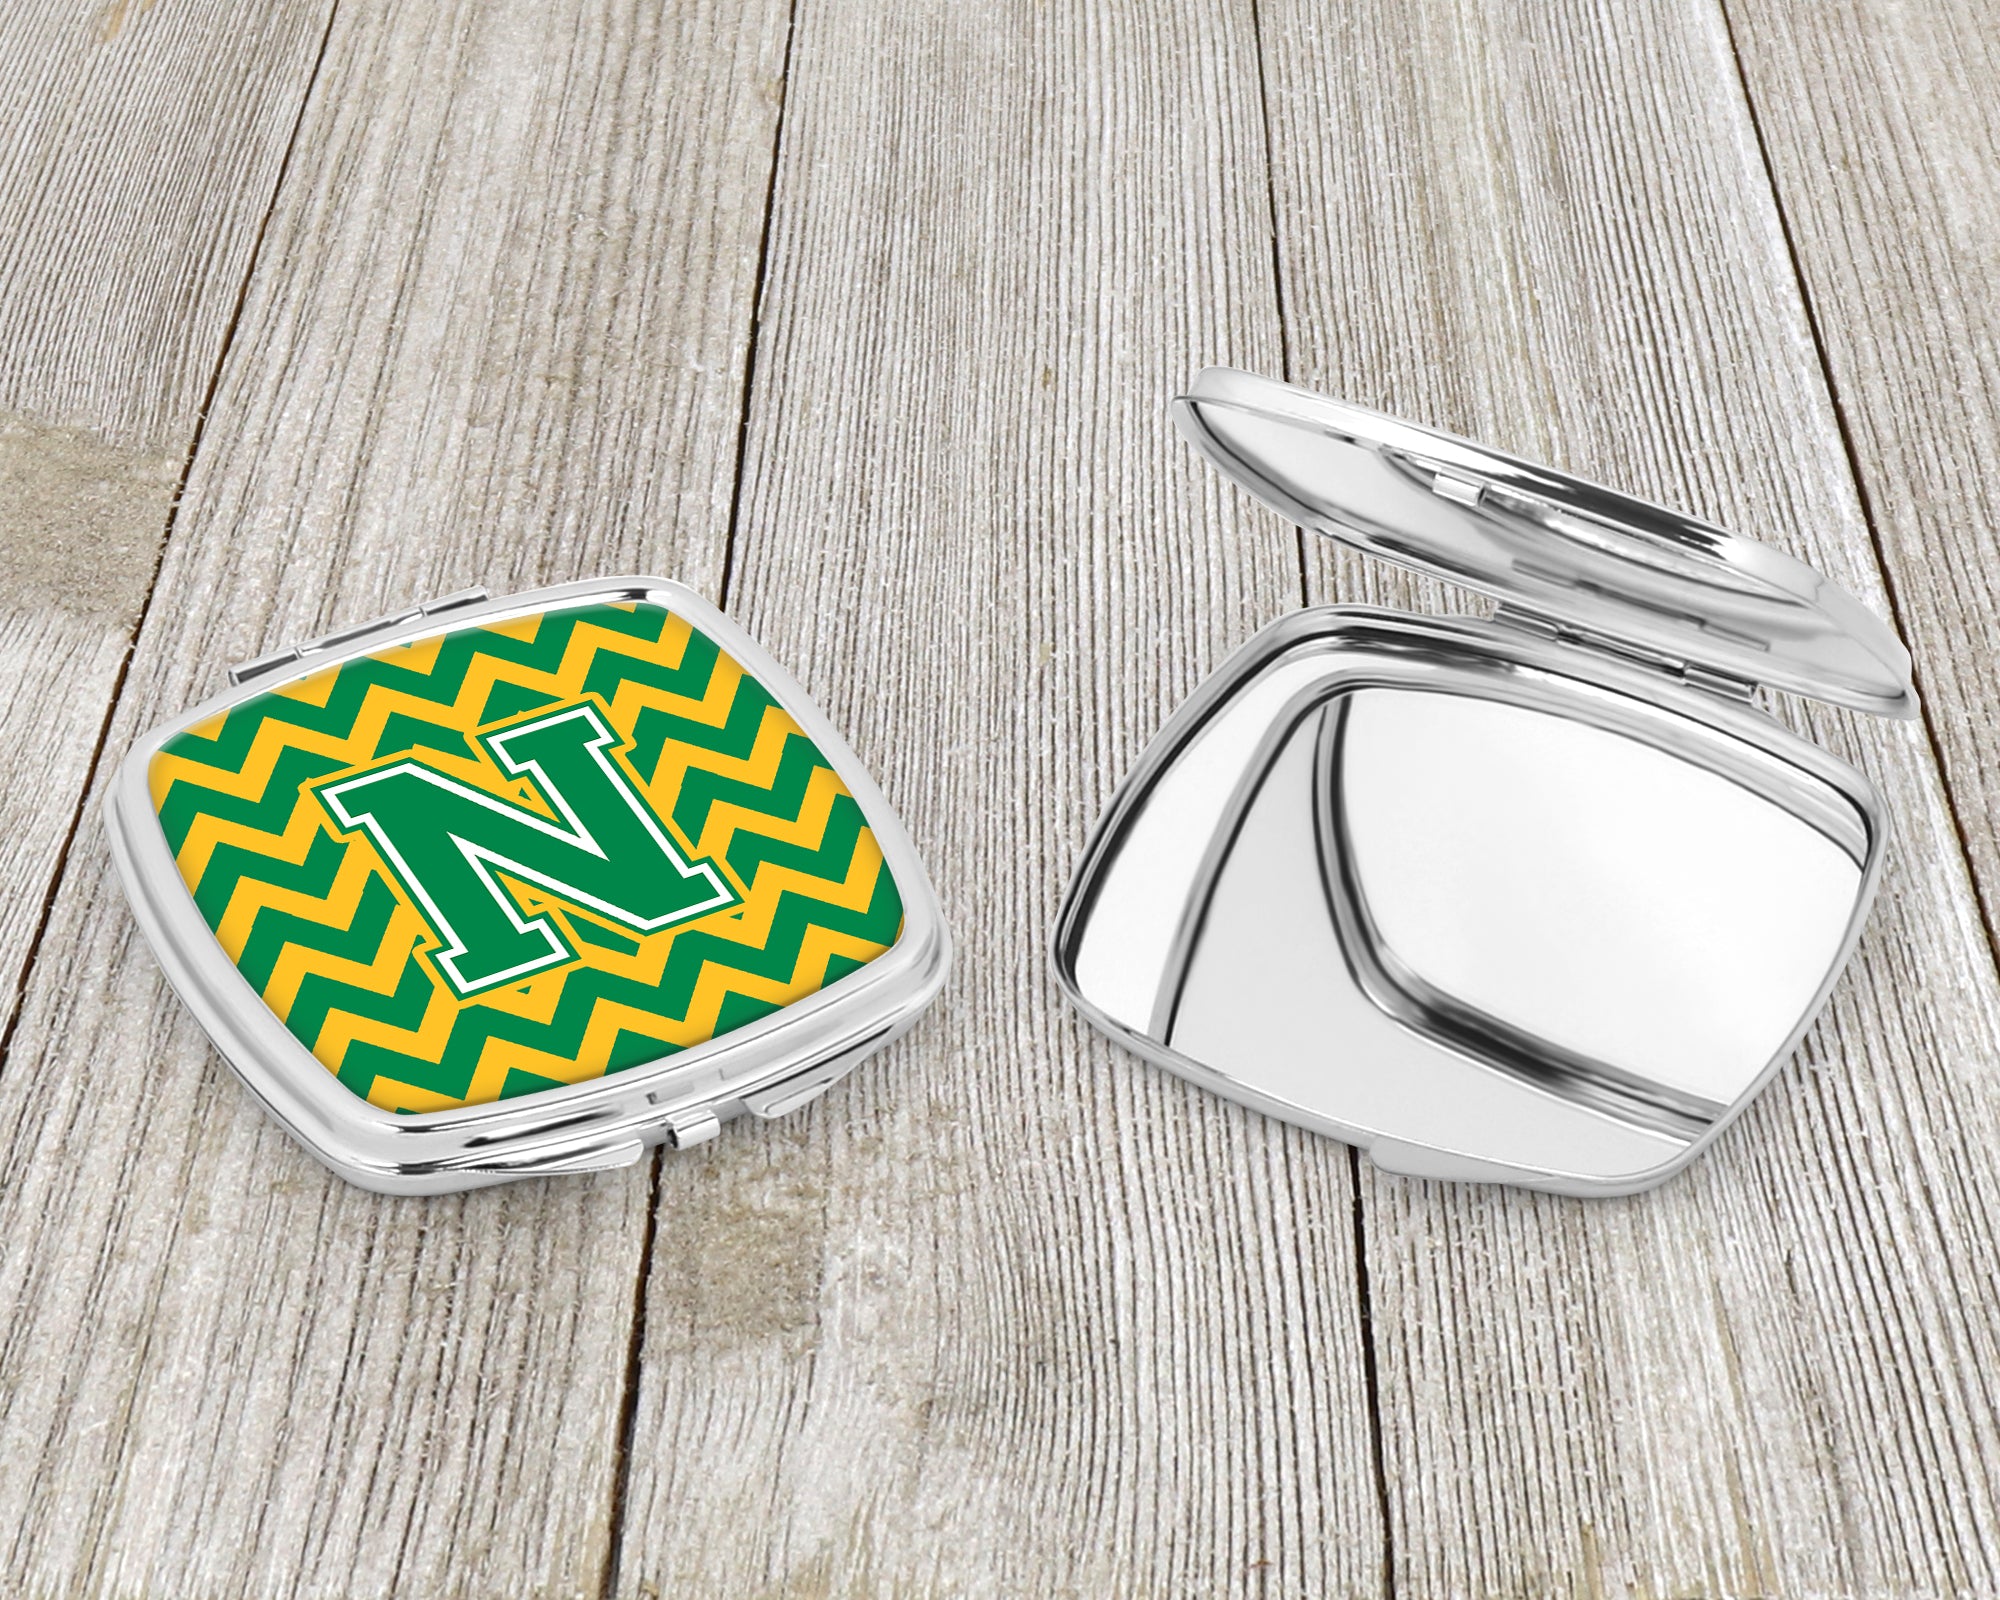 Letter N Chevron Green and Gold Compact Mirror CJ1059-NSCM  the-store.com.